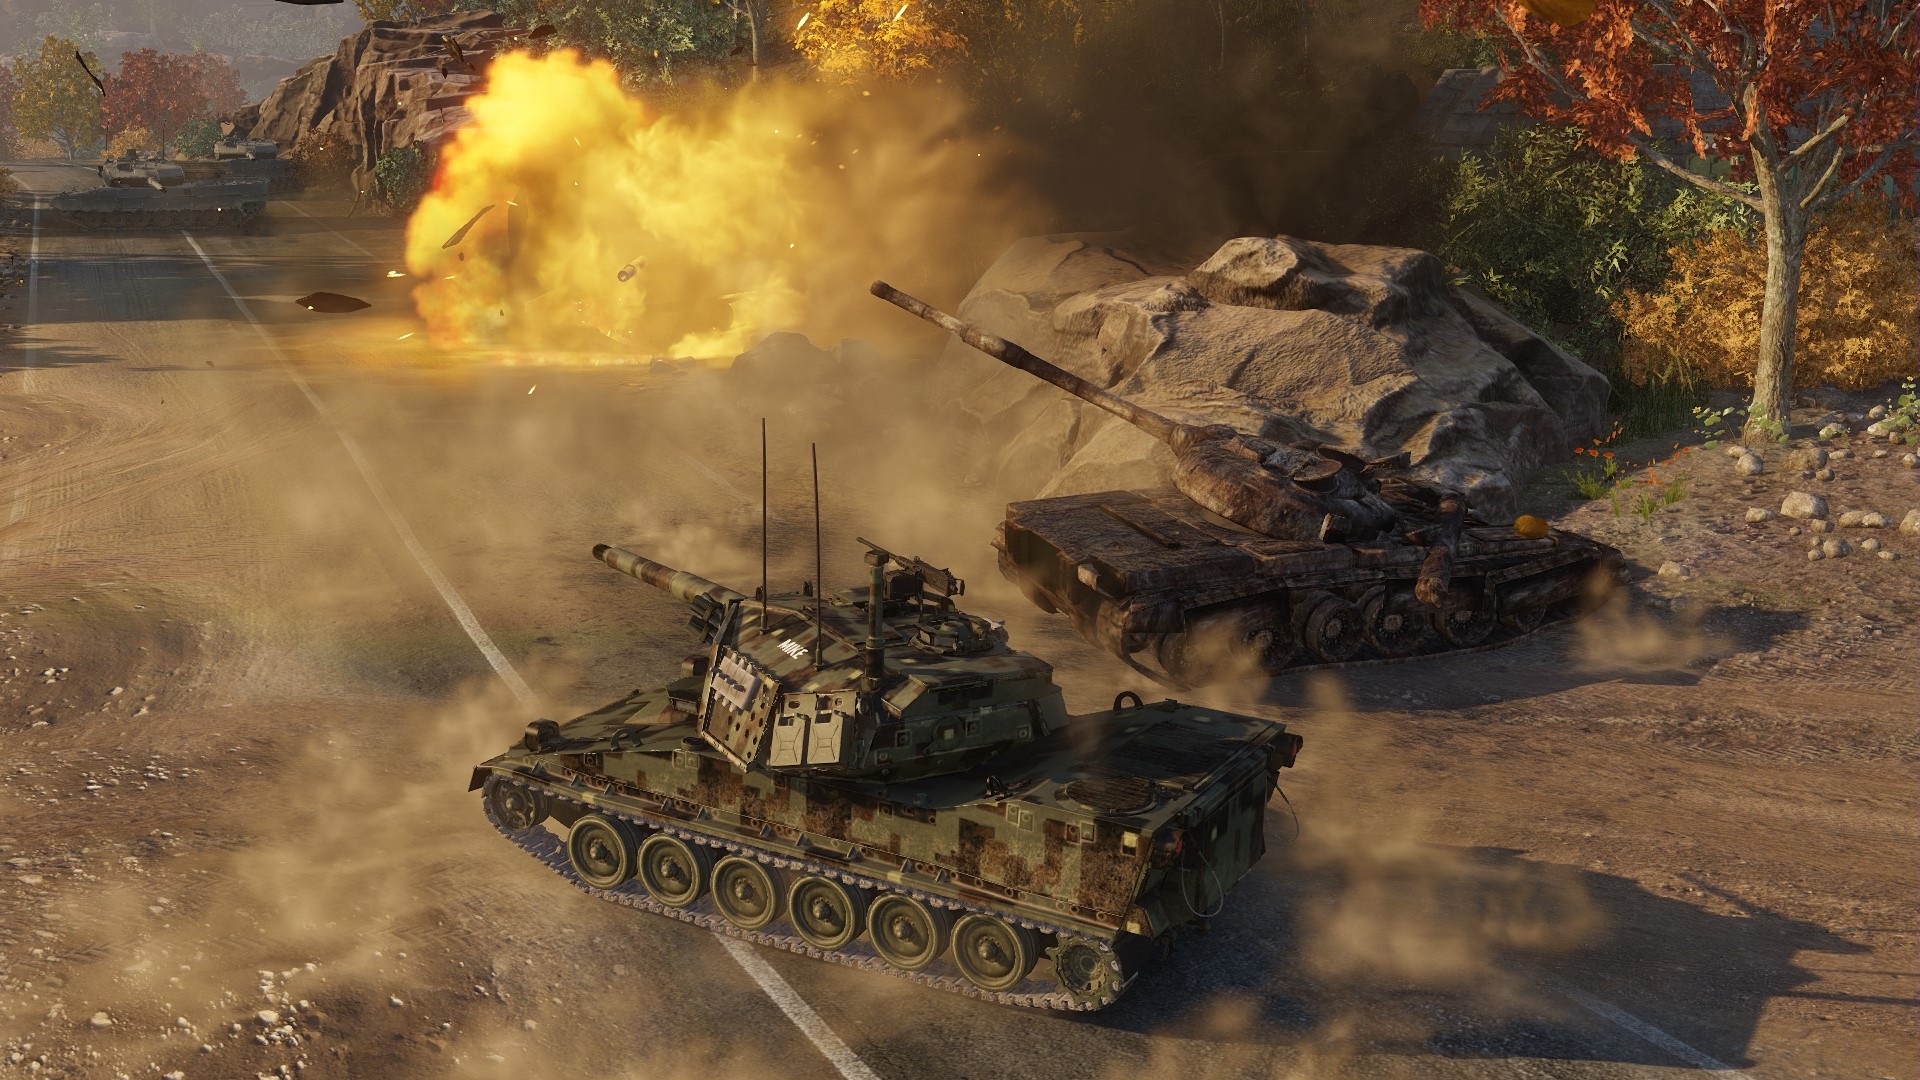 The best tank games on PC